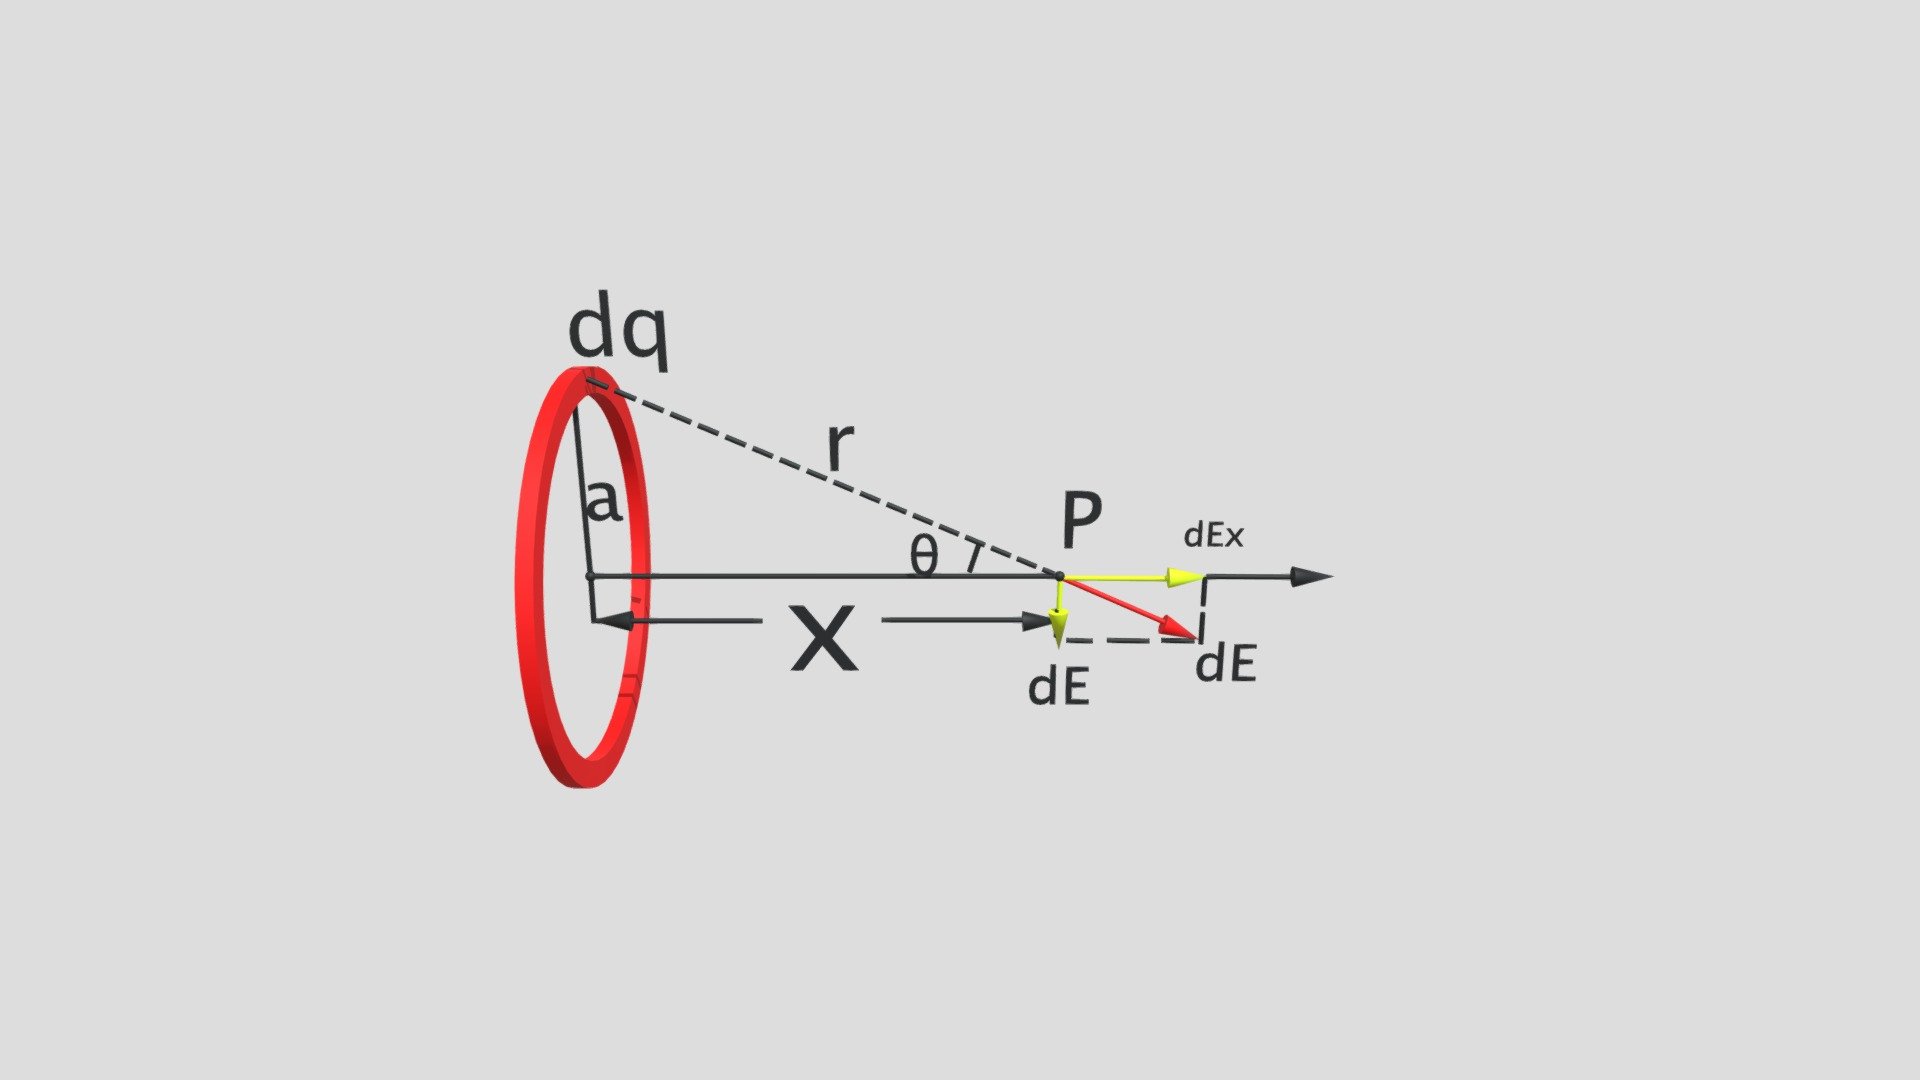 Gujrati] The direction of electric field at all points on the axis wi